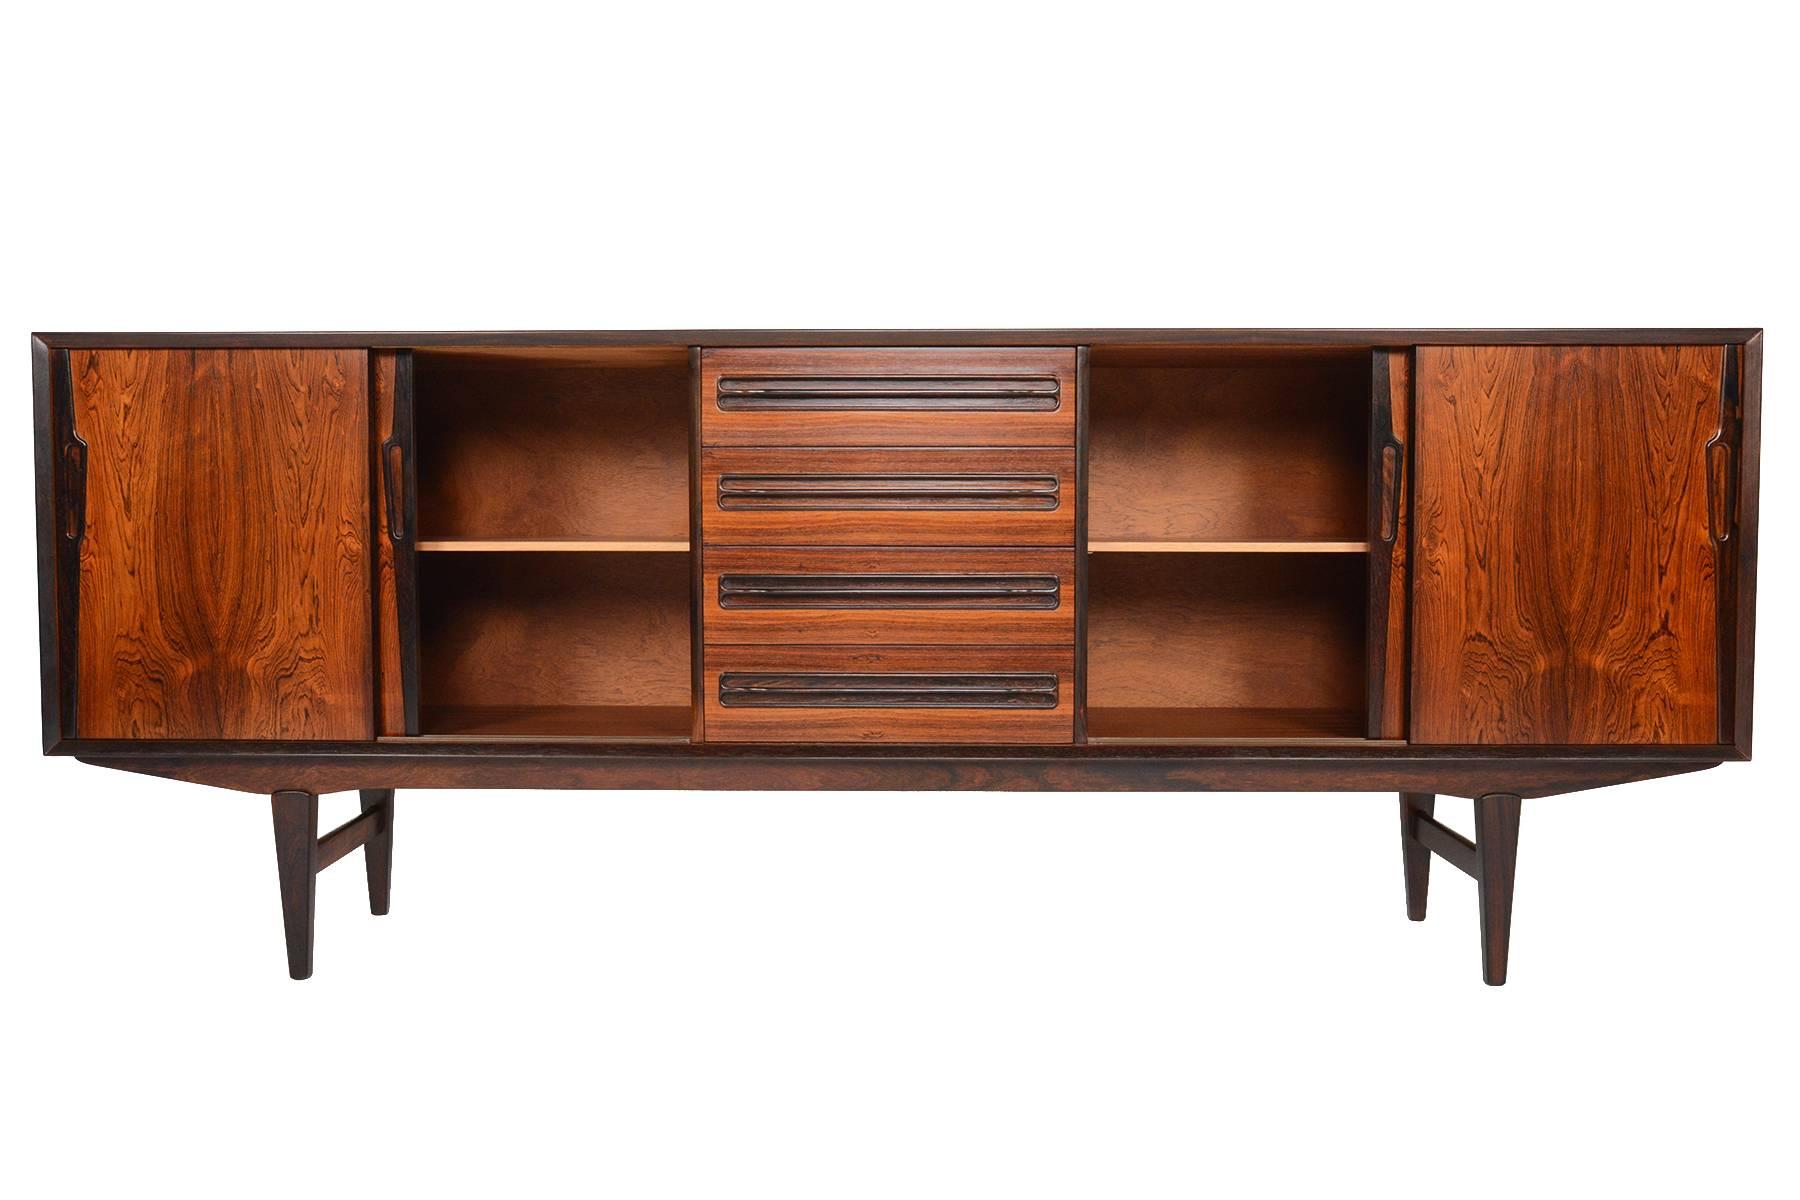 This large Danish modern rosewood credenza was designed by Ærthøj Jensen & Mølholm in the 1960s. Stunning wood grain is showcased on the sliding doors and case. Contrasting drawer pulls and banding highlight the exceptional grain patterns